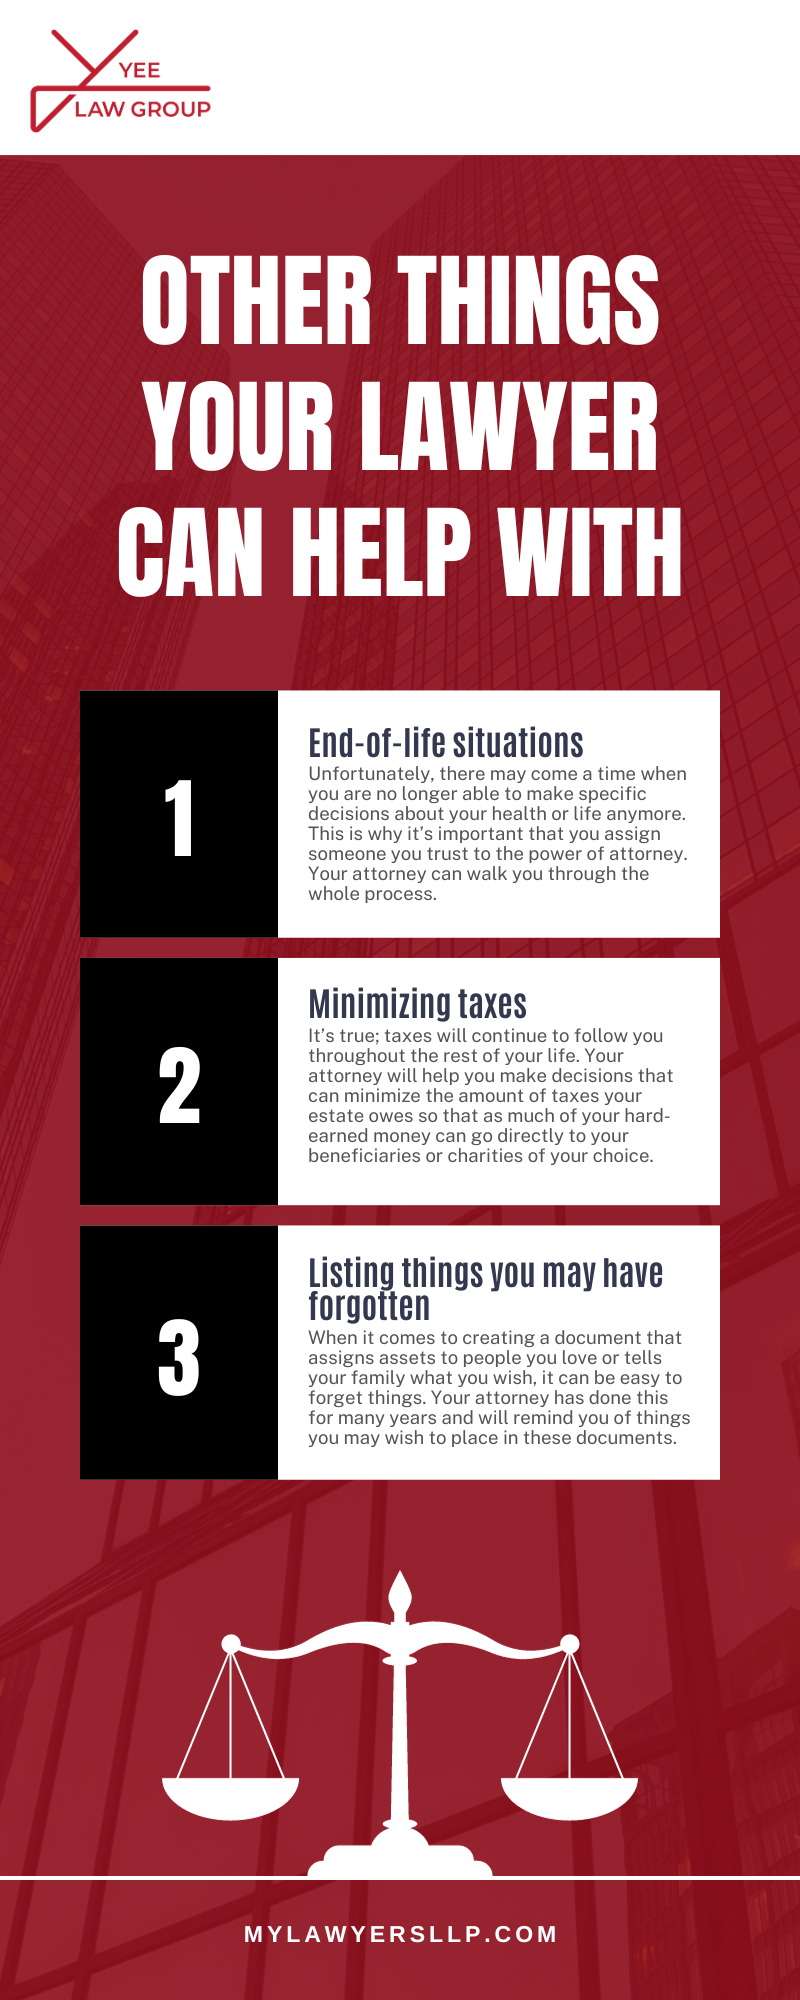 Other Things Your Lawyer Can Help With Infographic